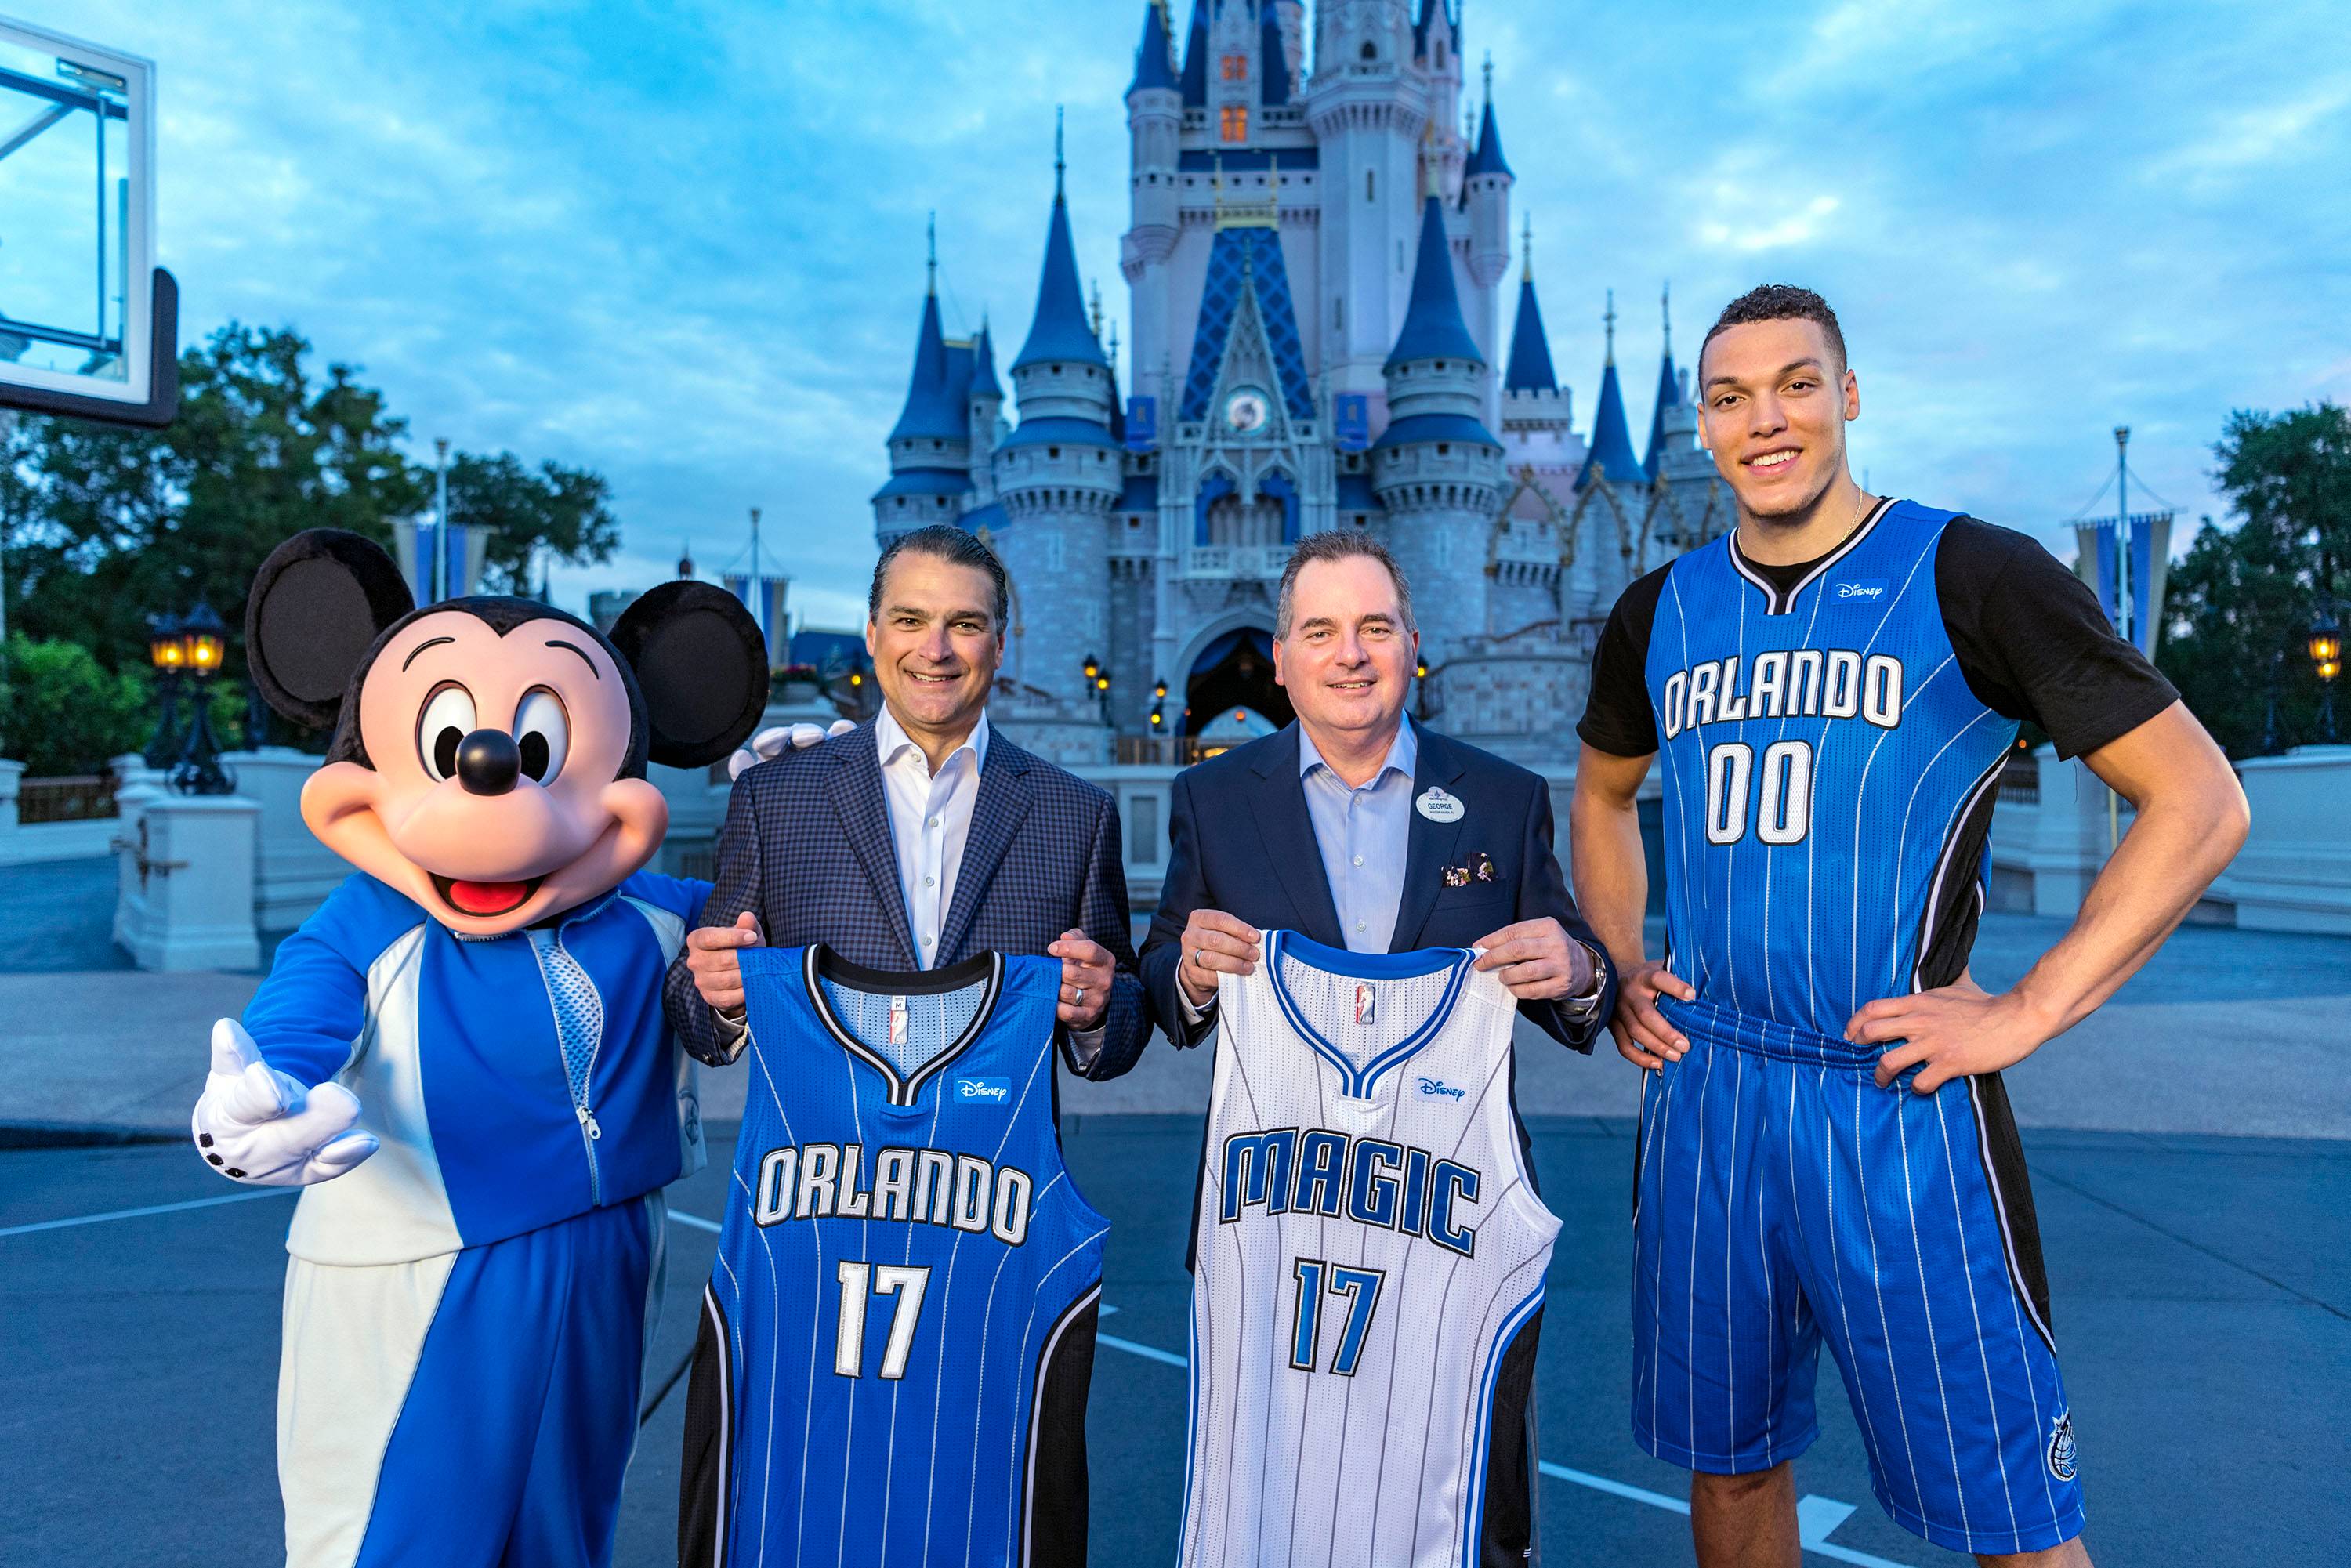 Orlando Magic CEO Alex Martins and Walt Disney World Resort President George A. Kalogridis pose with Orlando Magic star Aaron Gordon and Mickey Mouse as part of the announcement of Disney becoming the team’s first jersey sponsor